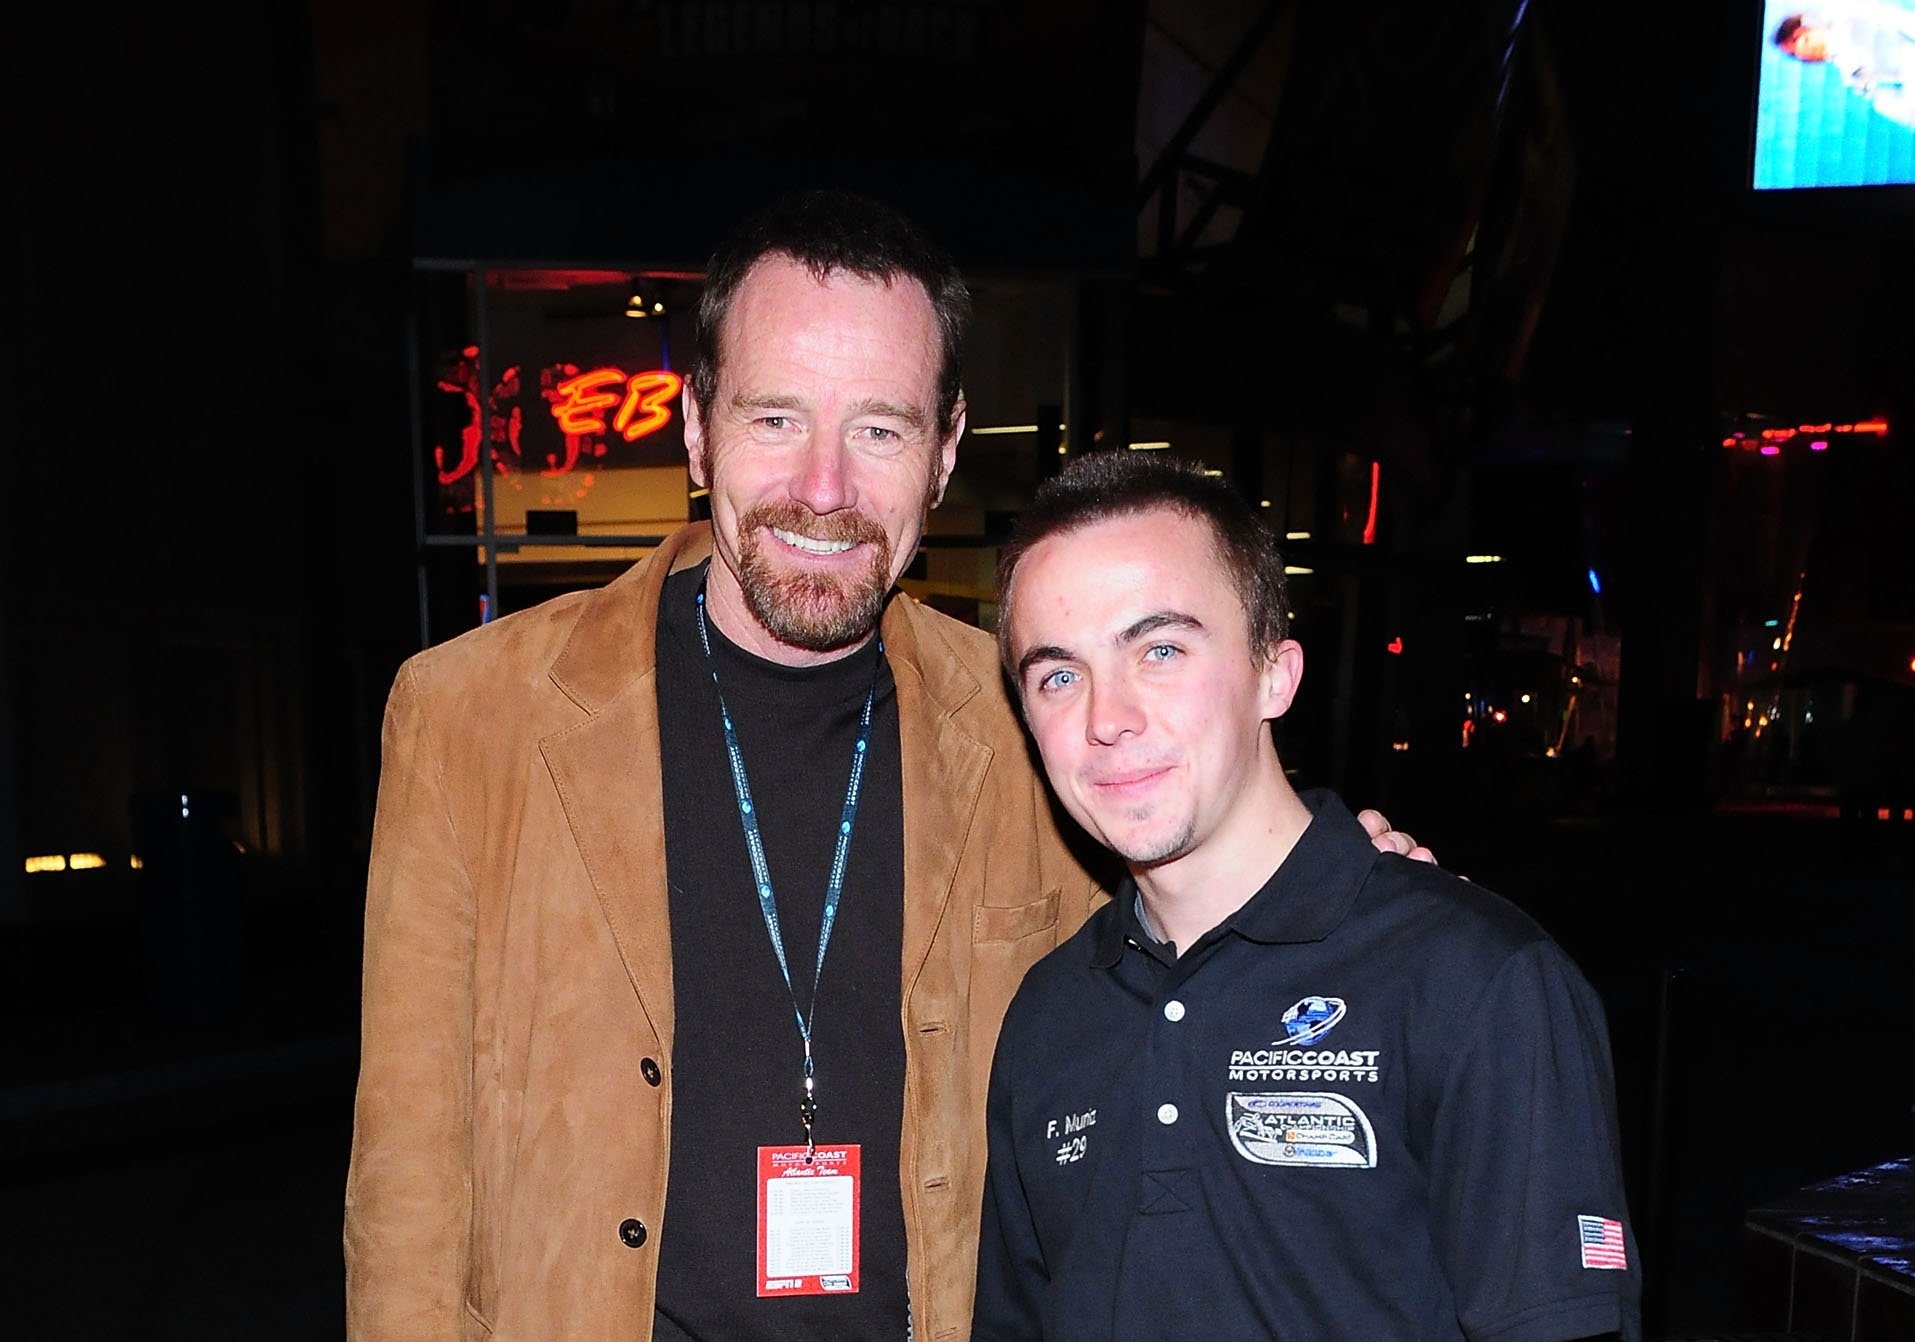 Bryan Cranston poses for a photo with Frankie Muniz at a press conference for Muniz' racing team, Pacific Coast Motor Sports in 2008. Muniz and Cranston have both expressed interested in a 'Malcolm in the Middle' reunion